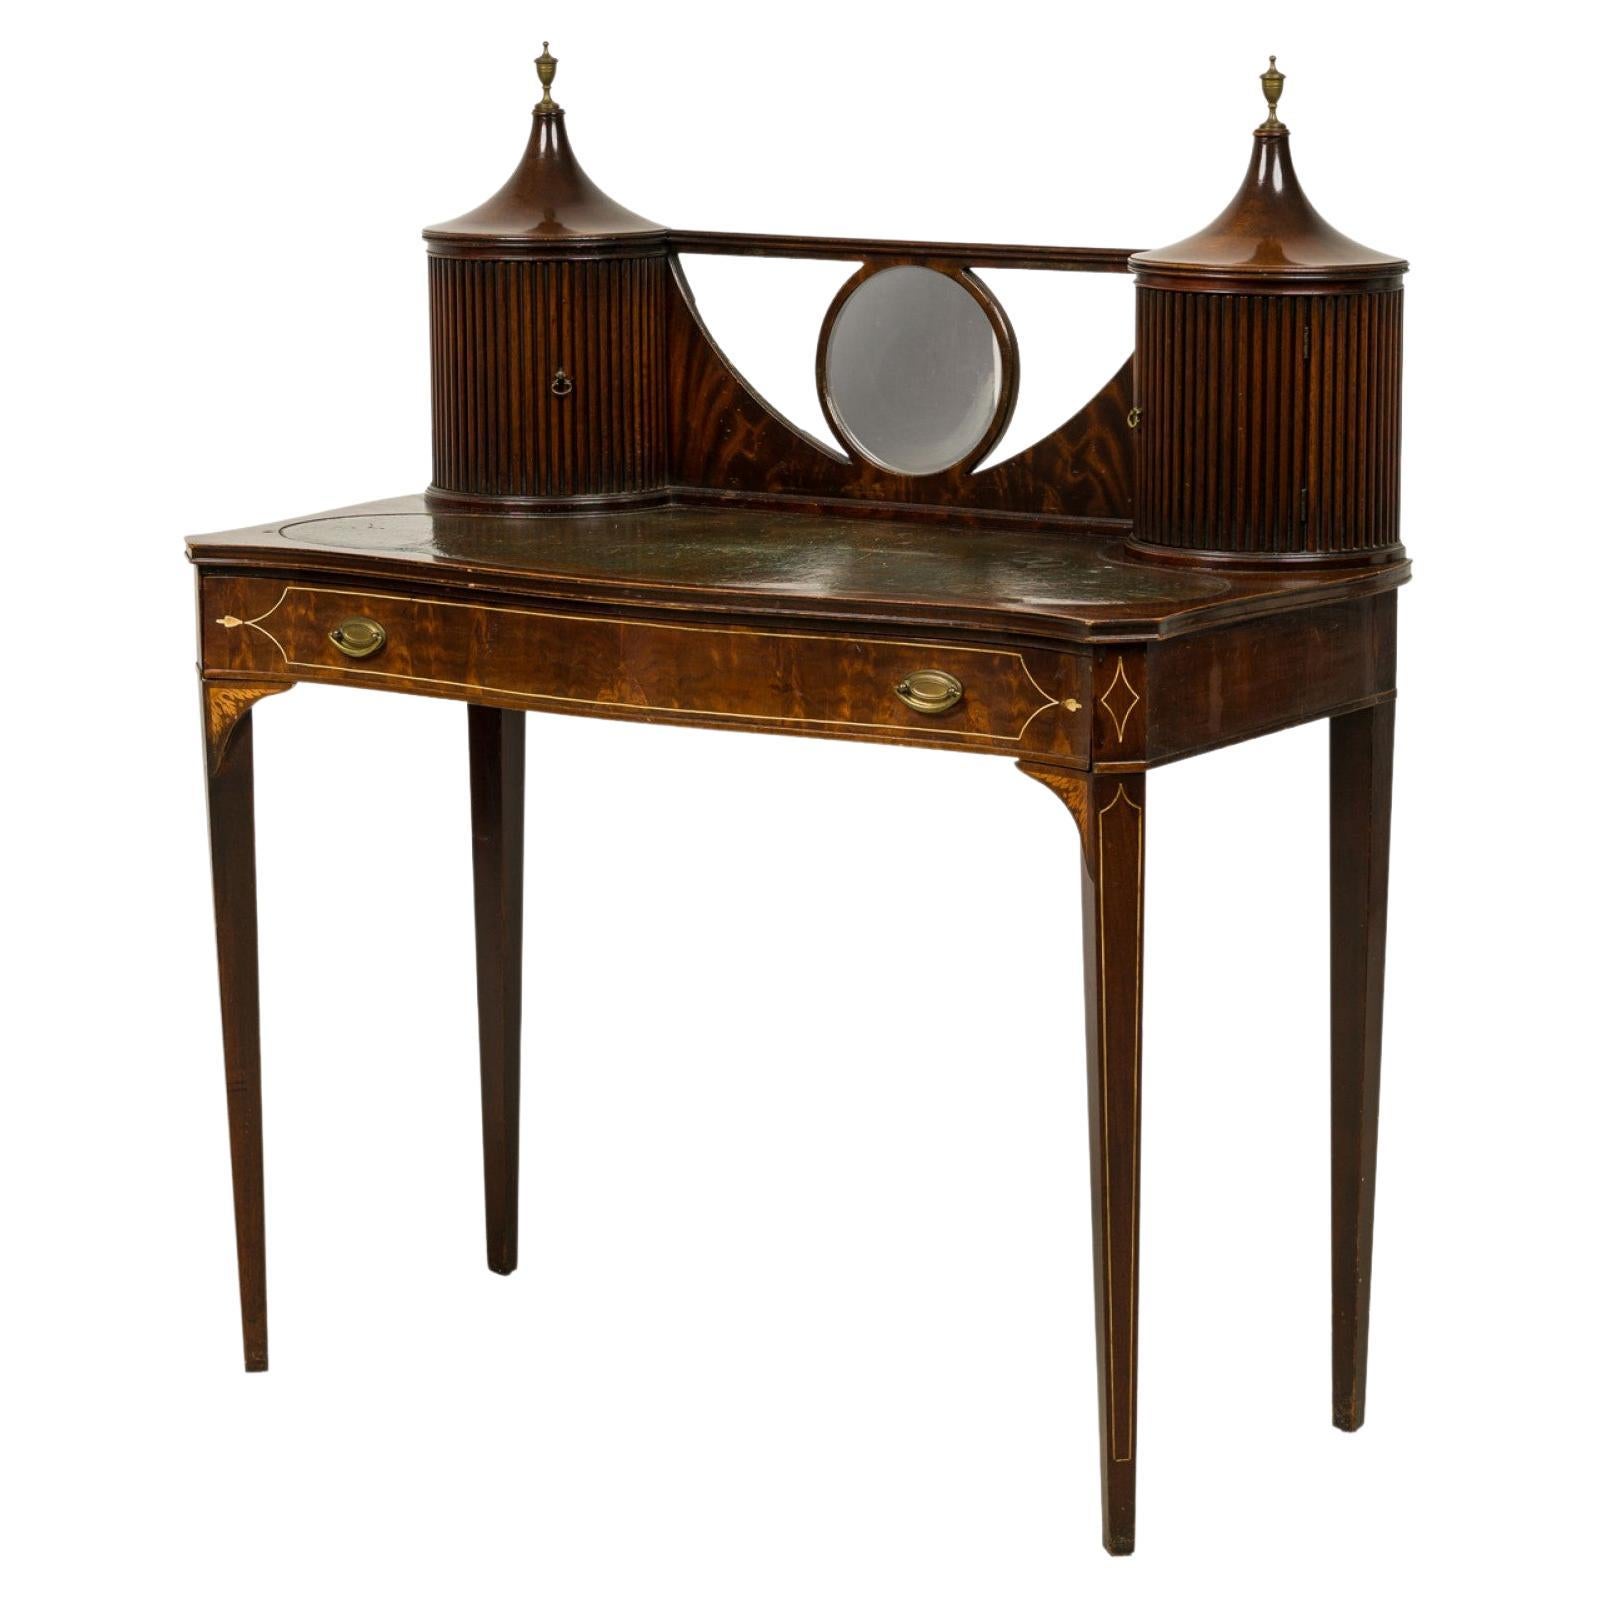 English Sheraton-style (19th century) mahogany vanity dressing desk with a central circular mirror mounted in a backrail between two cabinet compartments with rounded front fluted doors topped with urn finials, resting on a rectangular desktop with